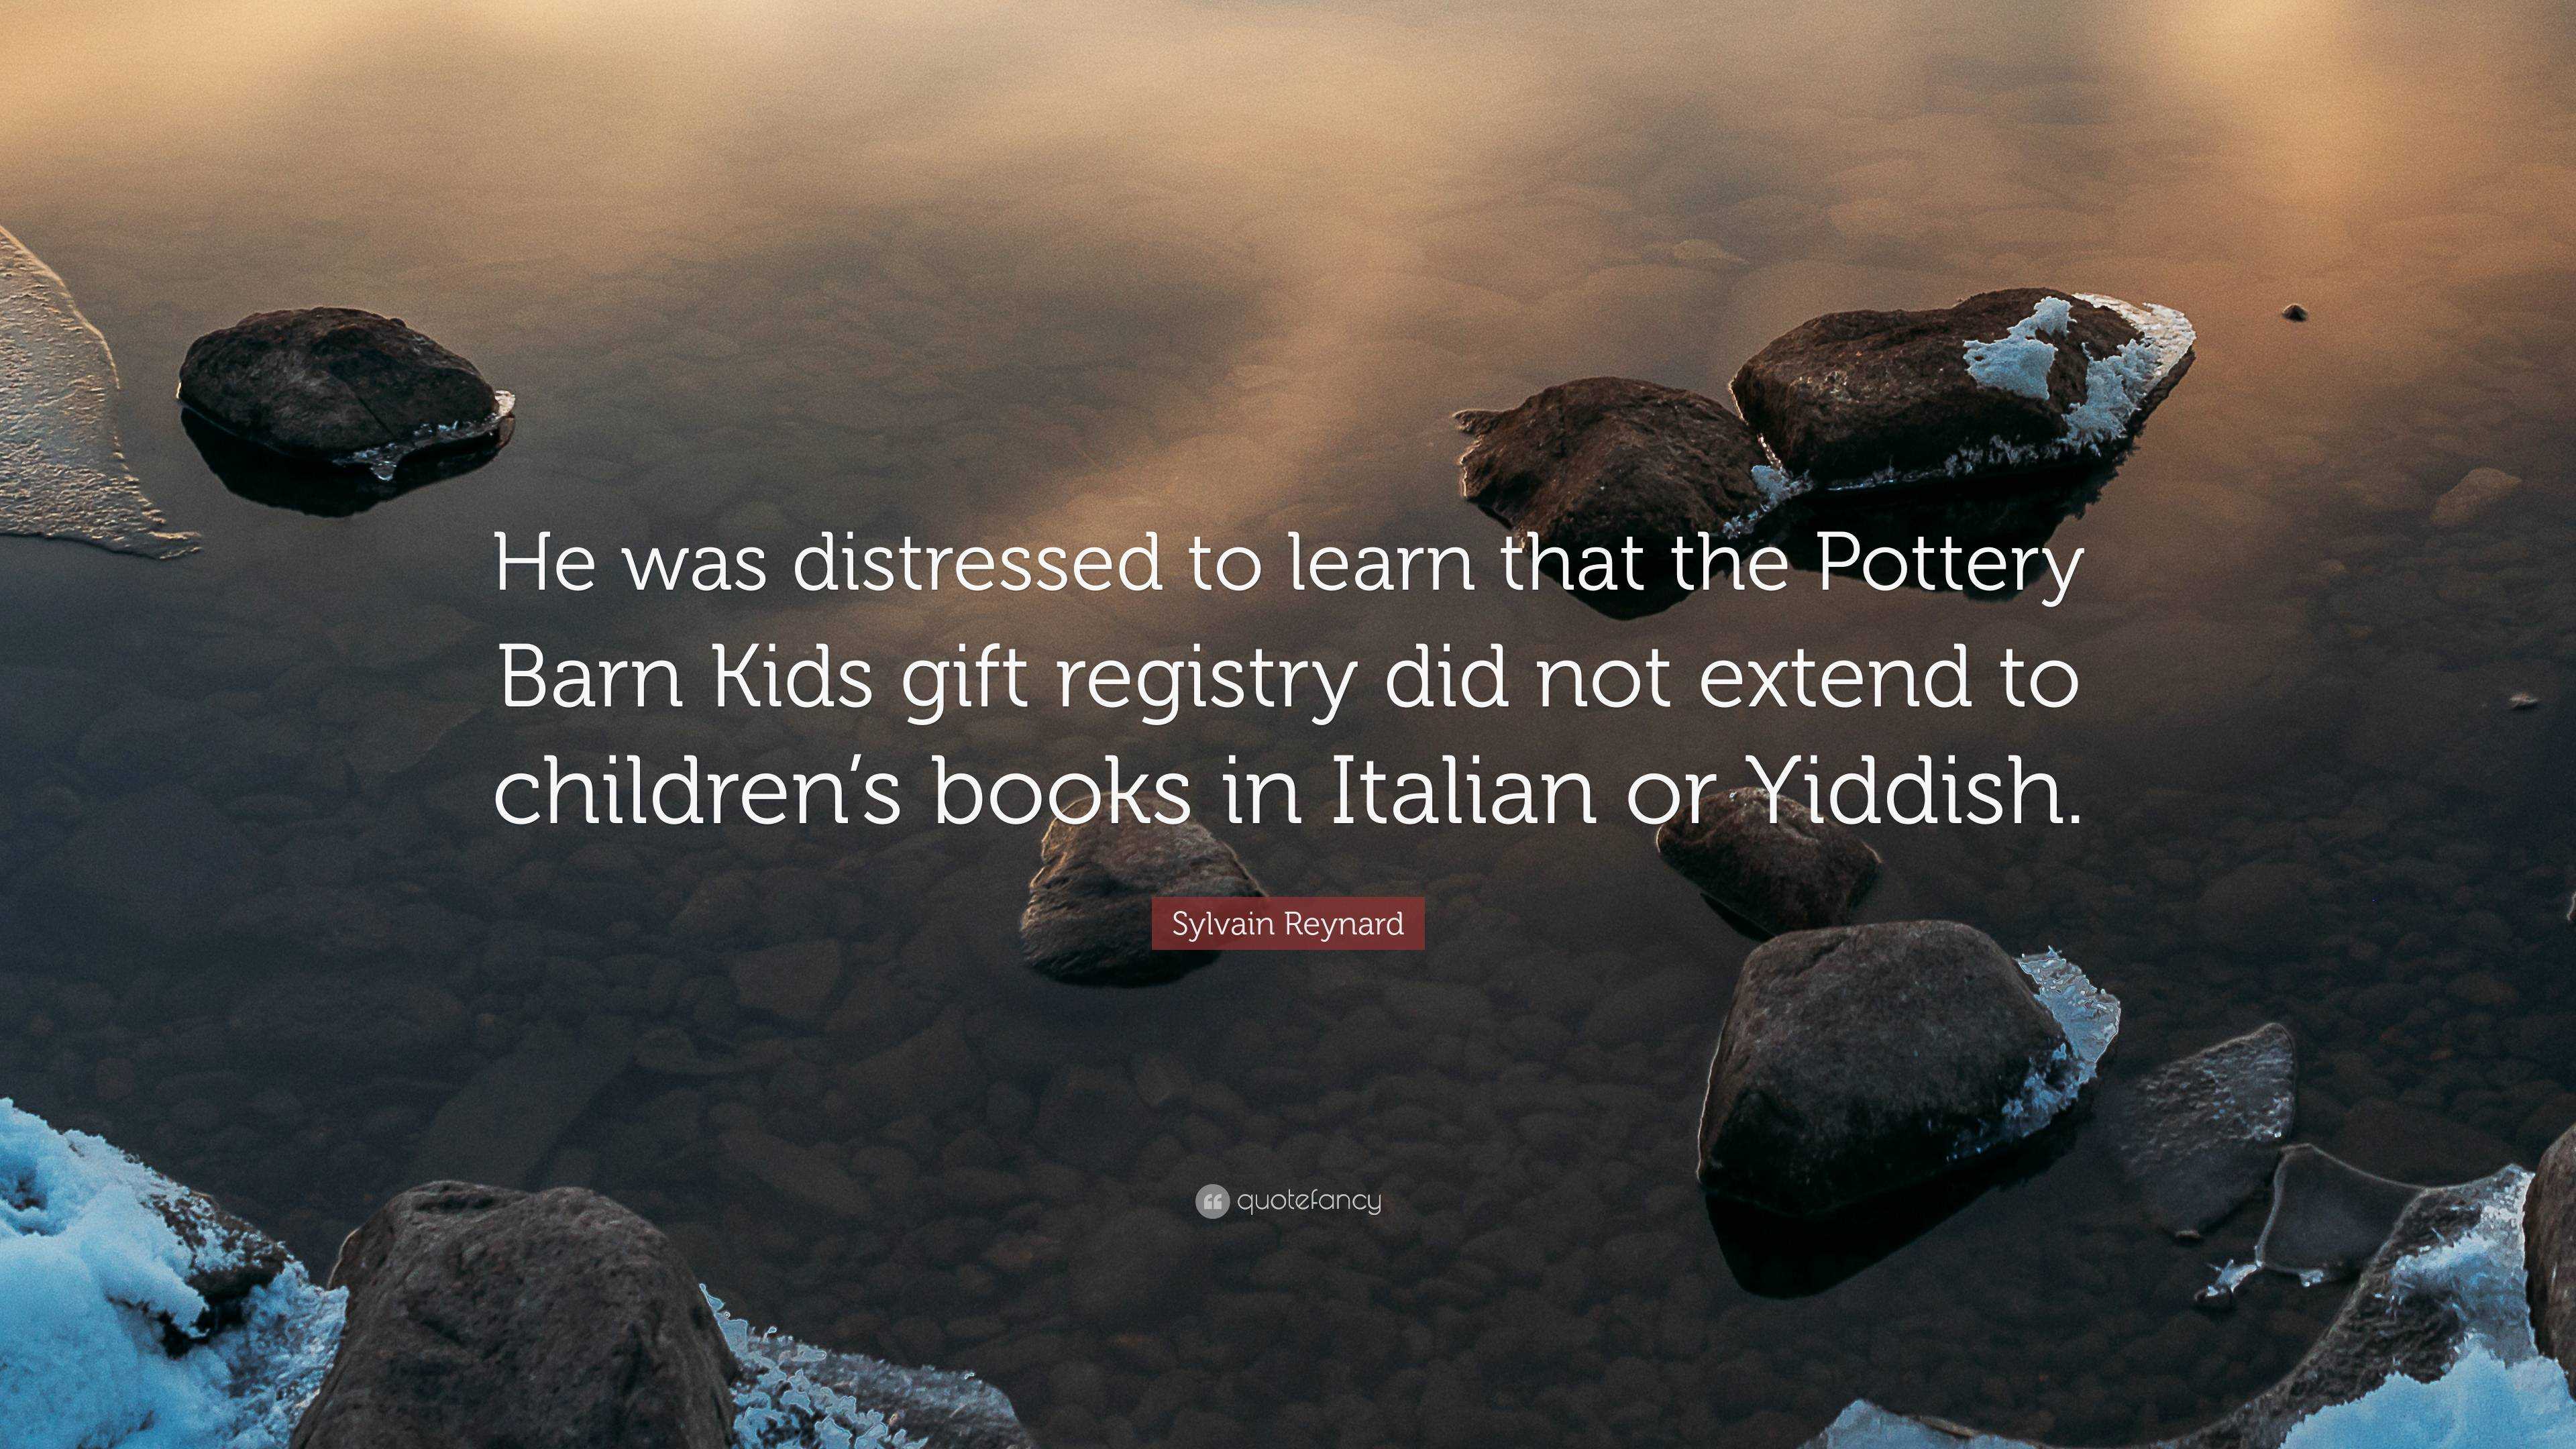 https://quotefancy.com/media/wallpaper/3840x2160/6736941-Sylvain-Reynard-Quote-He-was-distressed-to-learn-that-the-Pottery.jpg